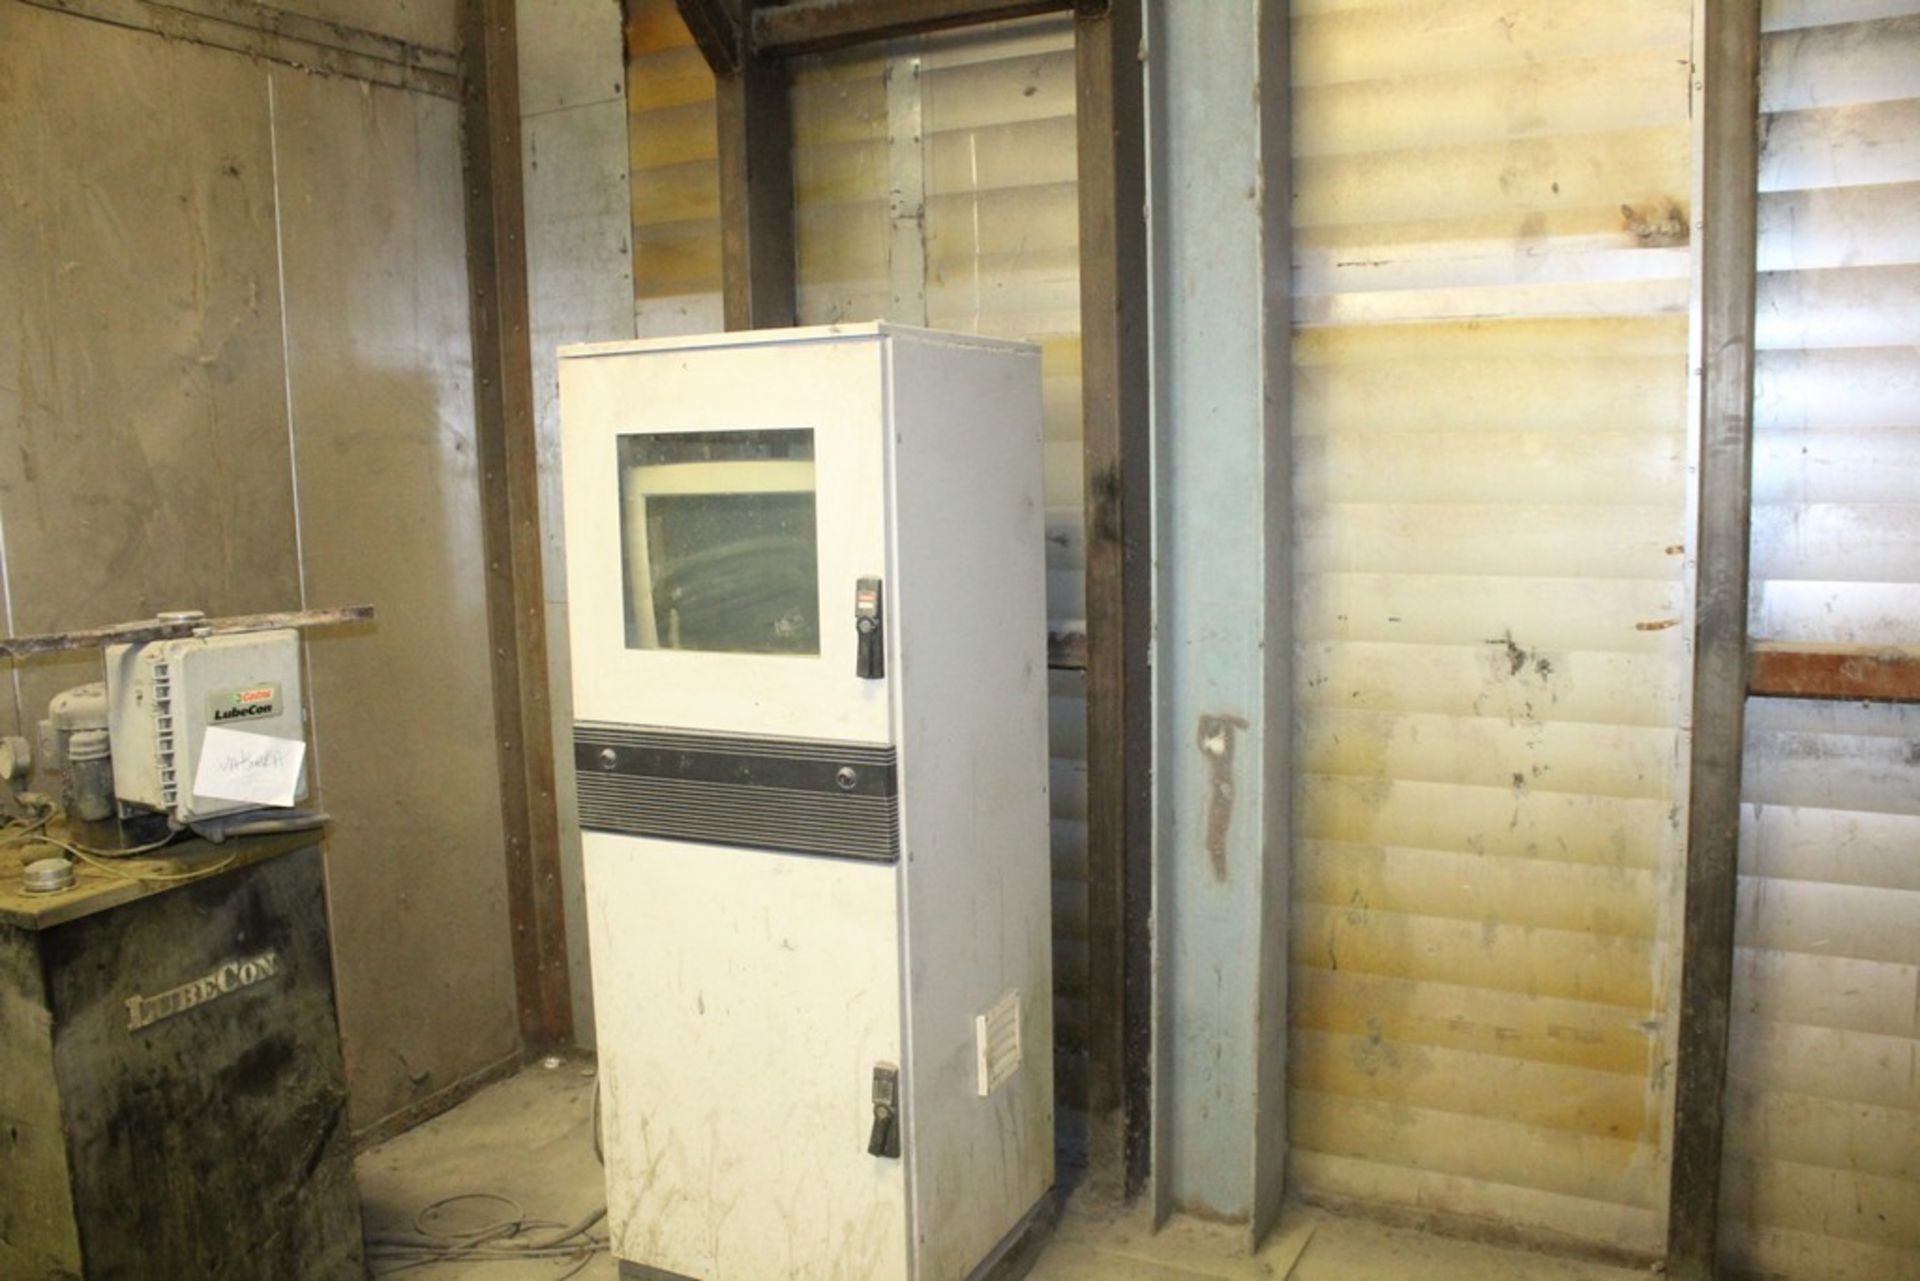 EISENMANN CONVECTION DRY-OFF OVEN, S/N A40-324-02 SALE OF THIS LOT IS SUBJECT TO BULK BID #2, IF THE - Image 7 of 7